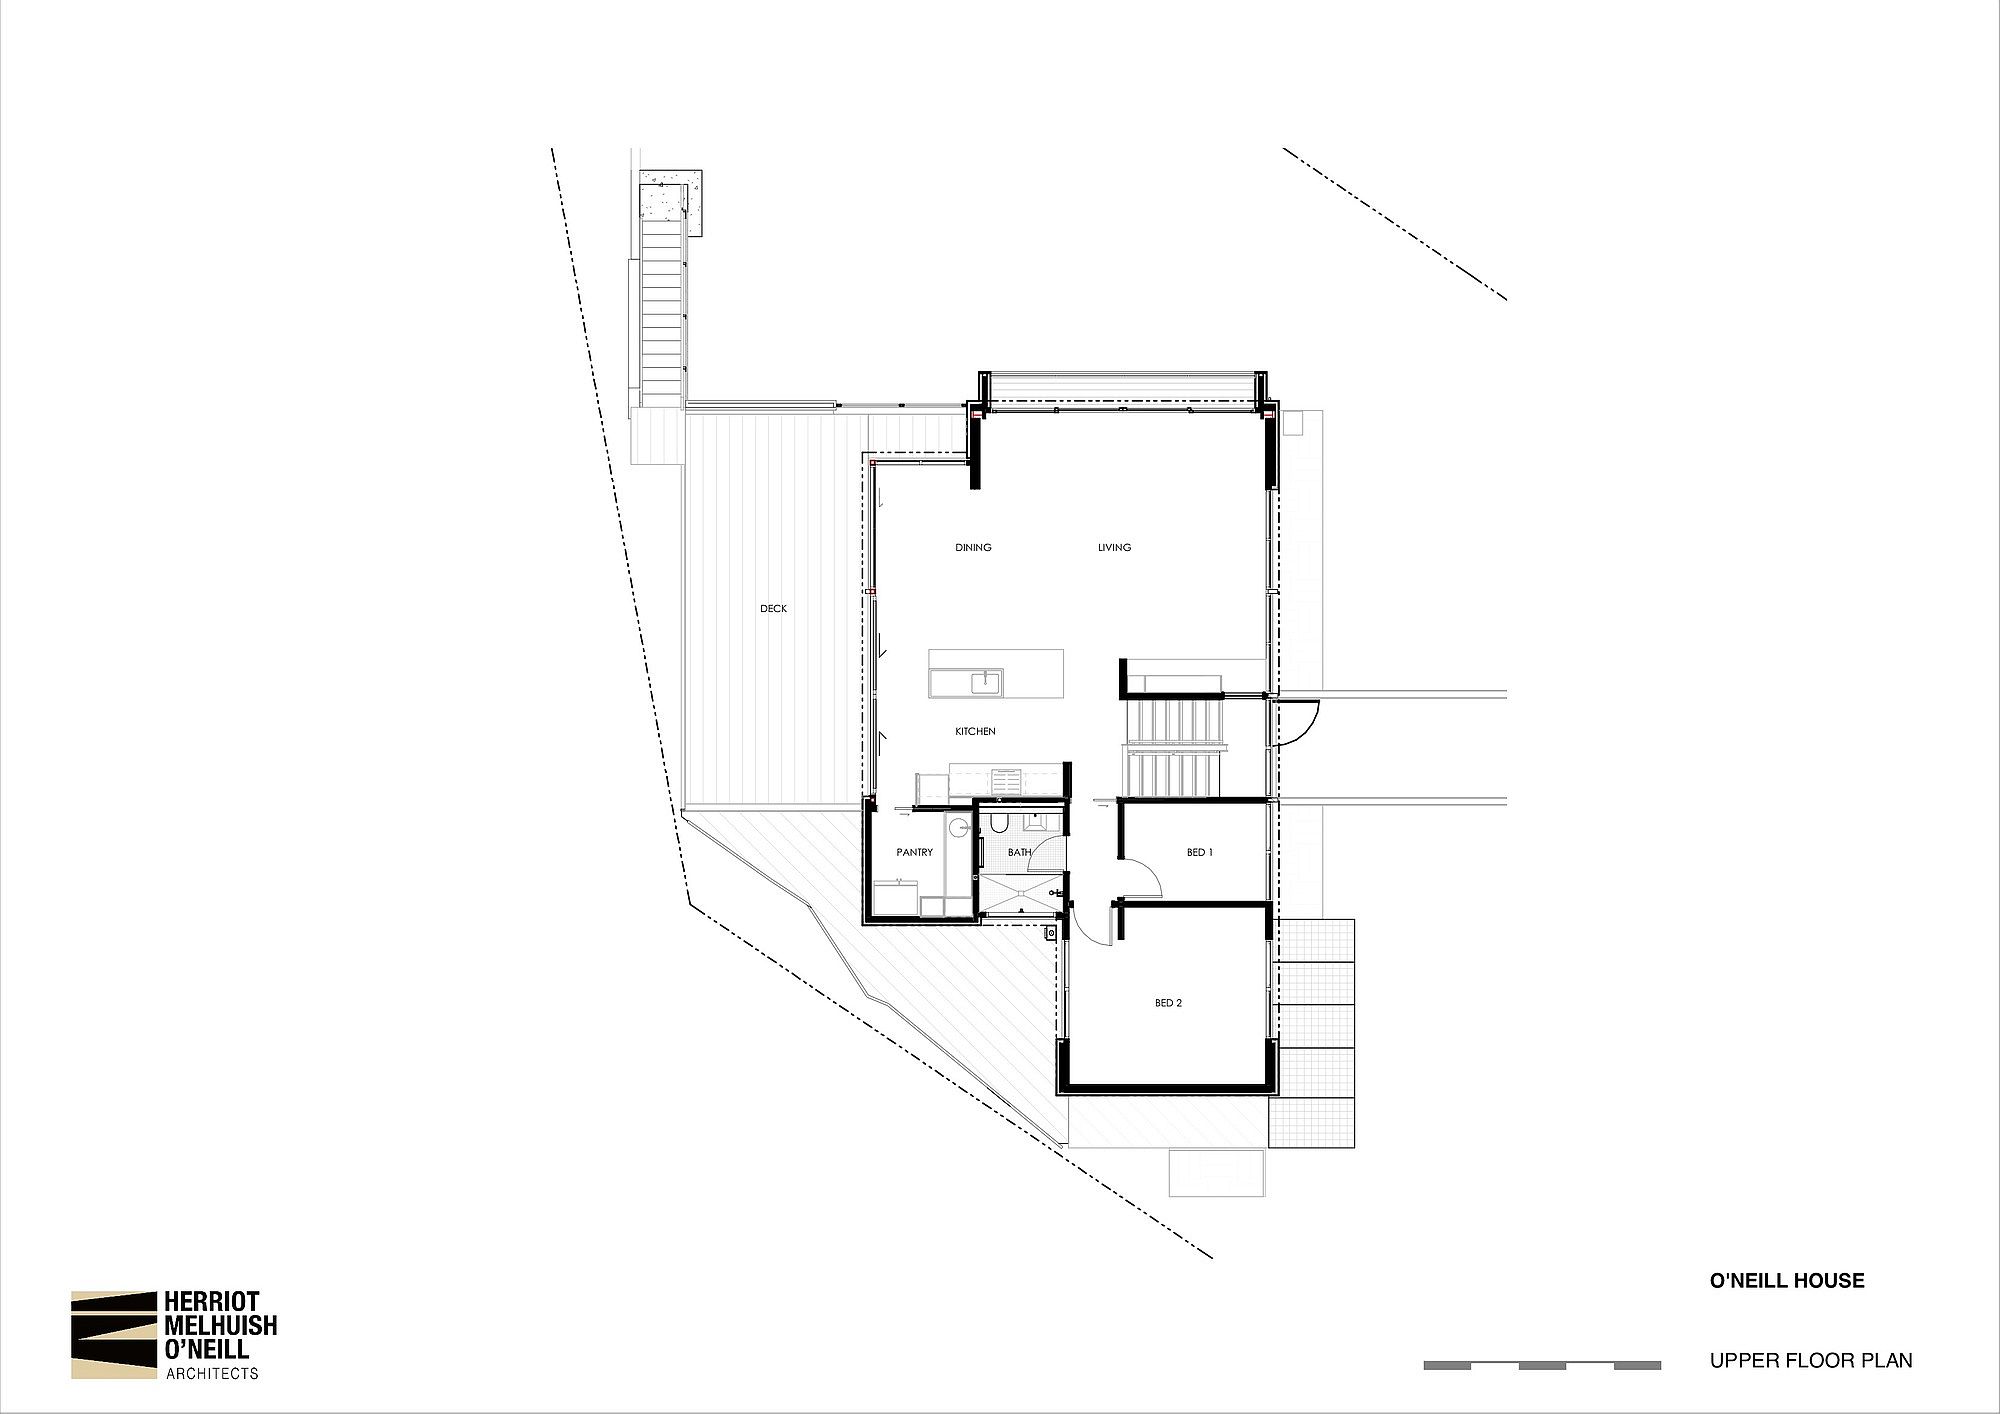 Floor plan of O’Neill House in New Zealand